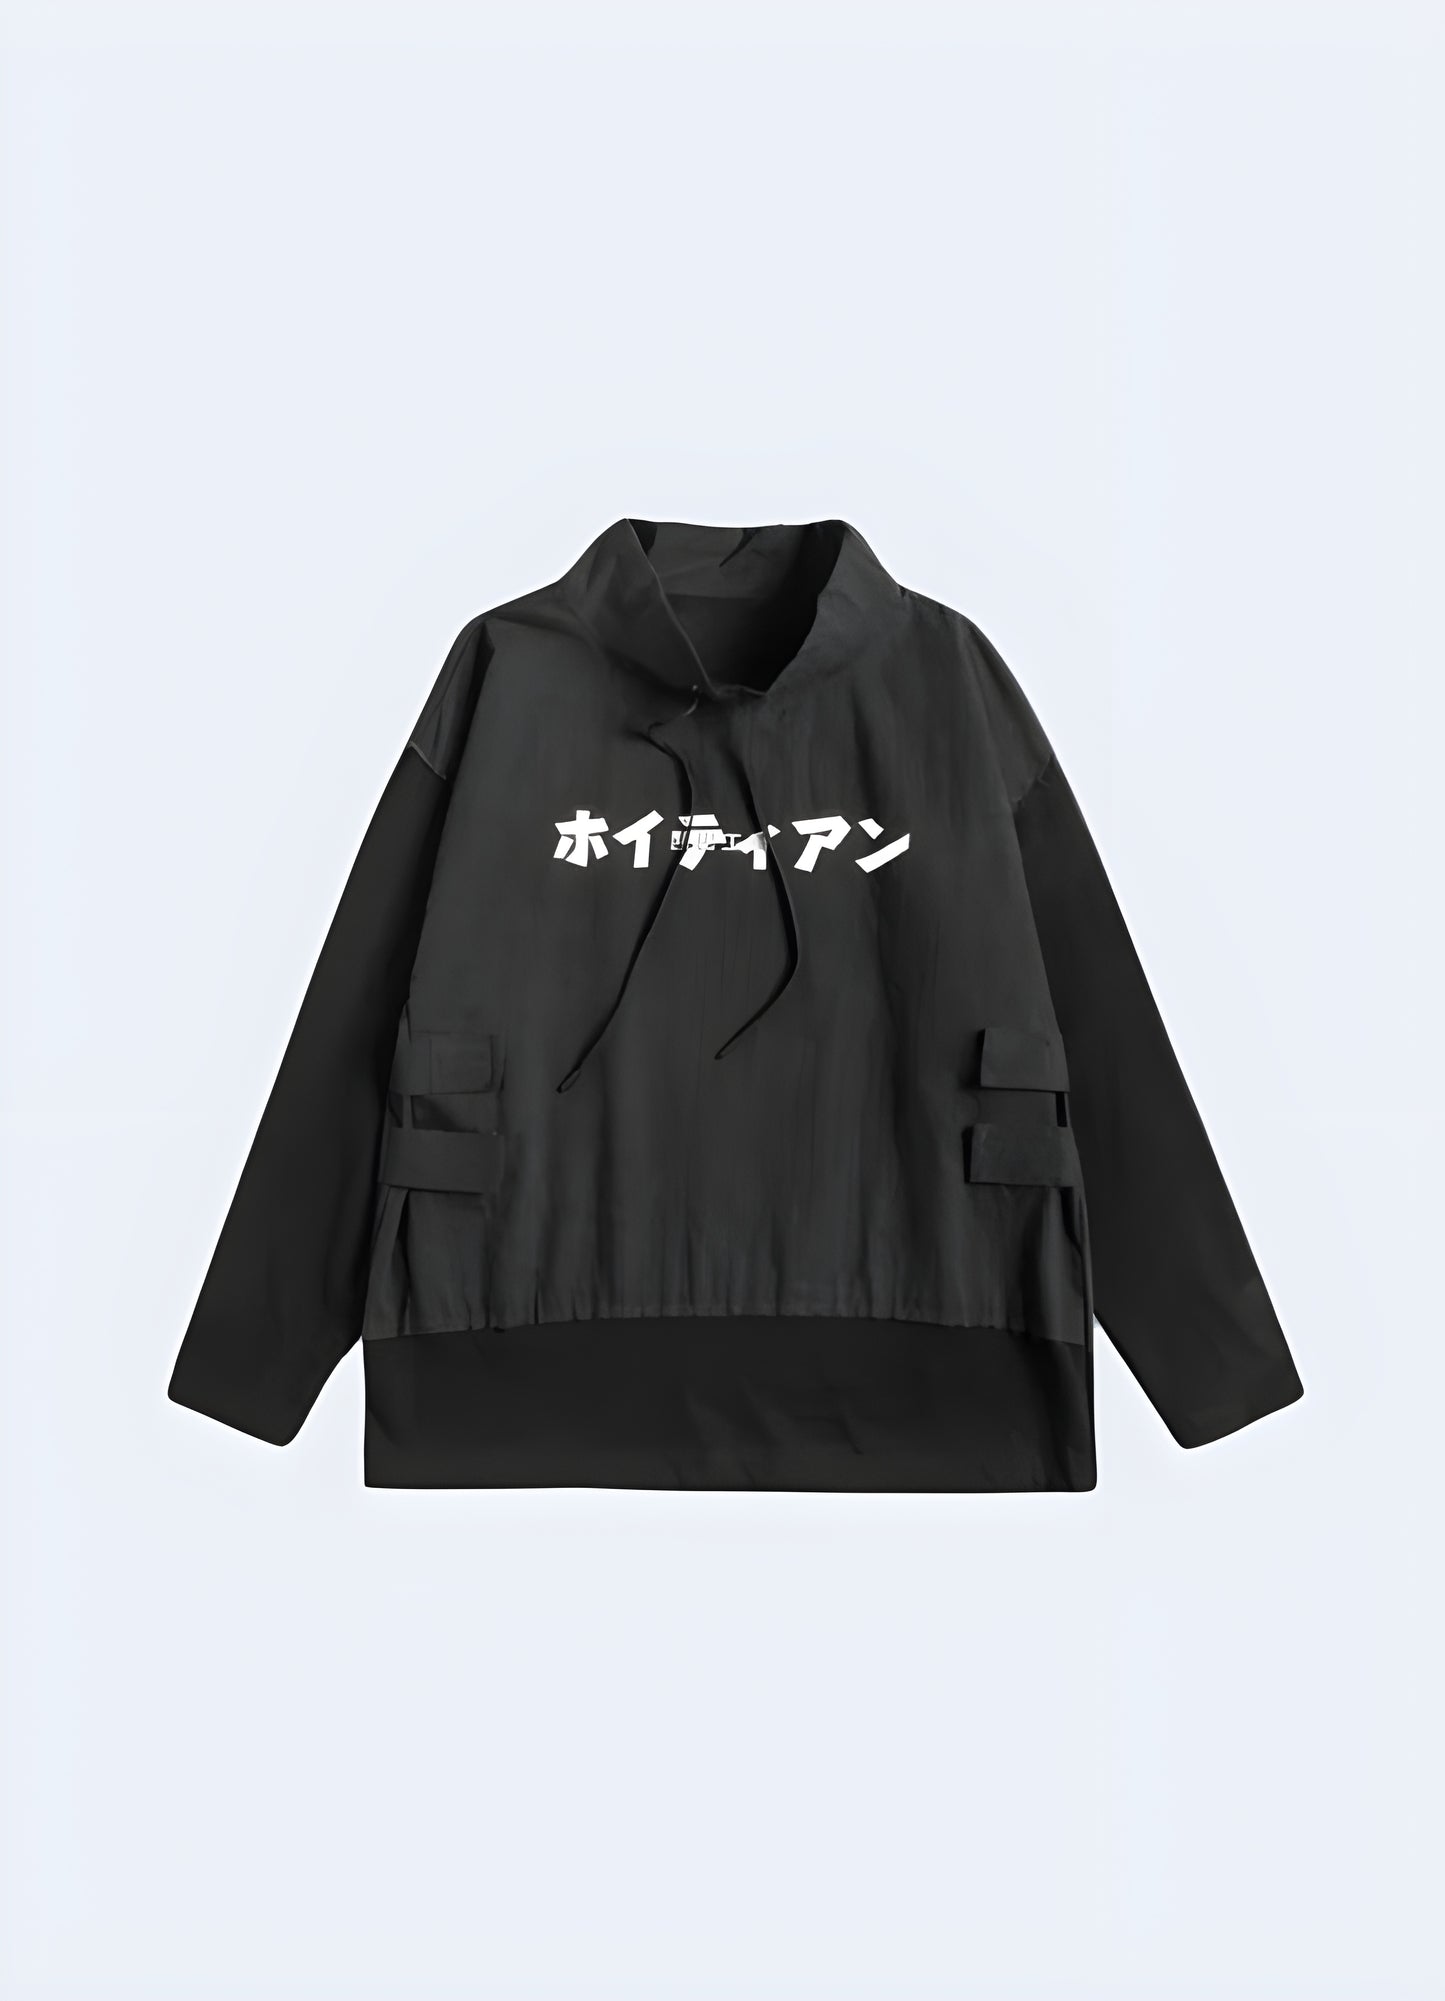 Boldly simple, this black japanese hoodie lets the quality speak for itself. 